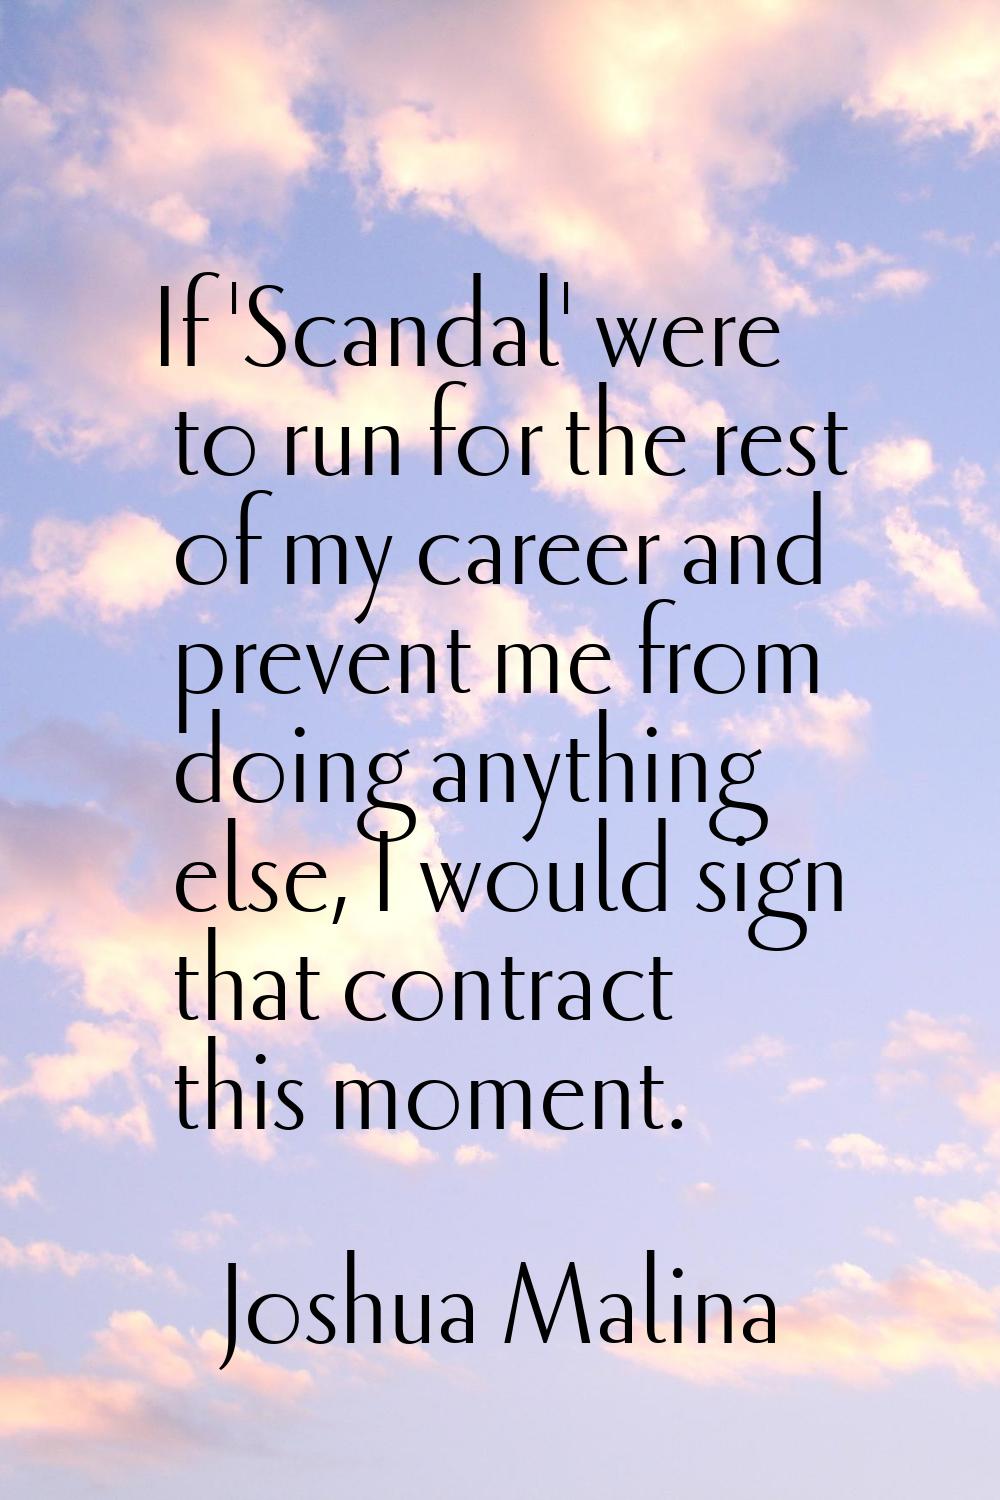 If 'Scandal' were to run for the rest of my career and prevent me from doing anything else, I would